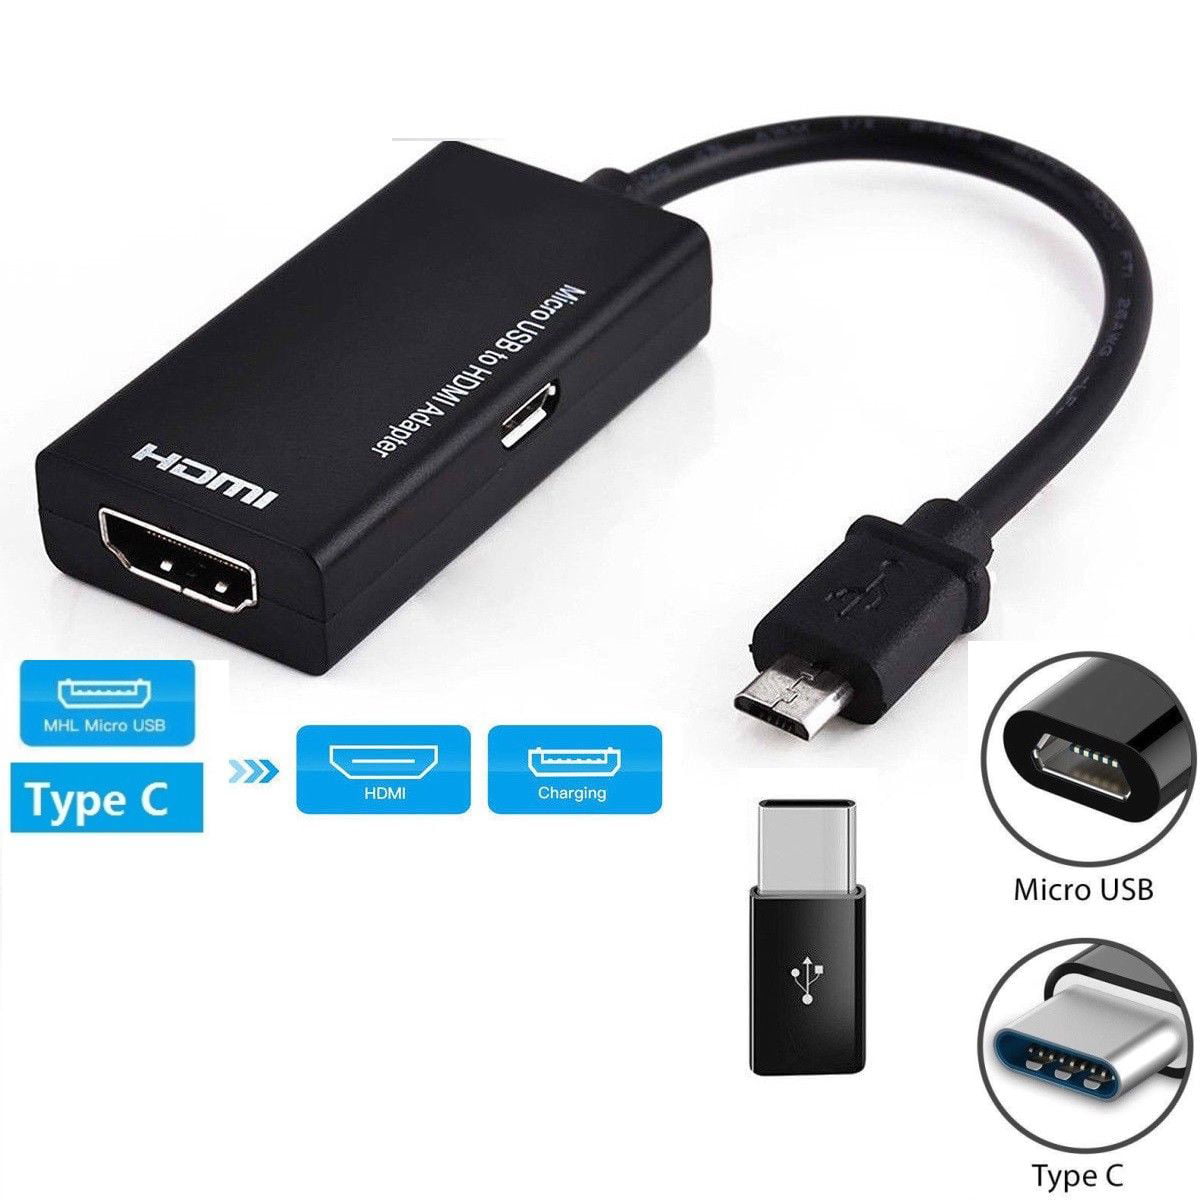 PRO OTG Power Cable Works for HTC Sensation XE with Power Connect to Any Compatible USB Accessory with MicroUSB 